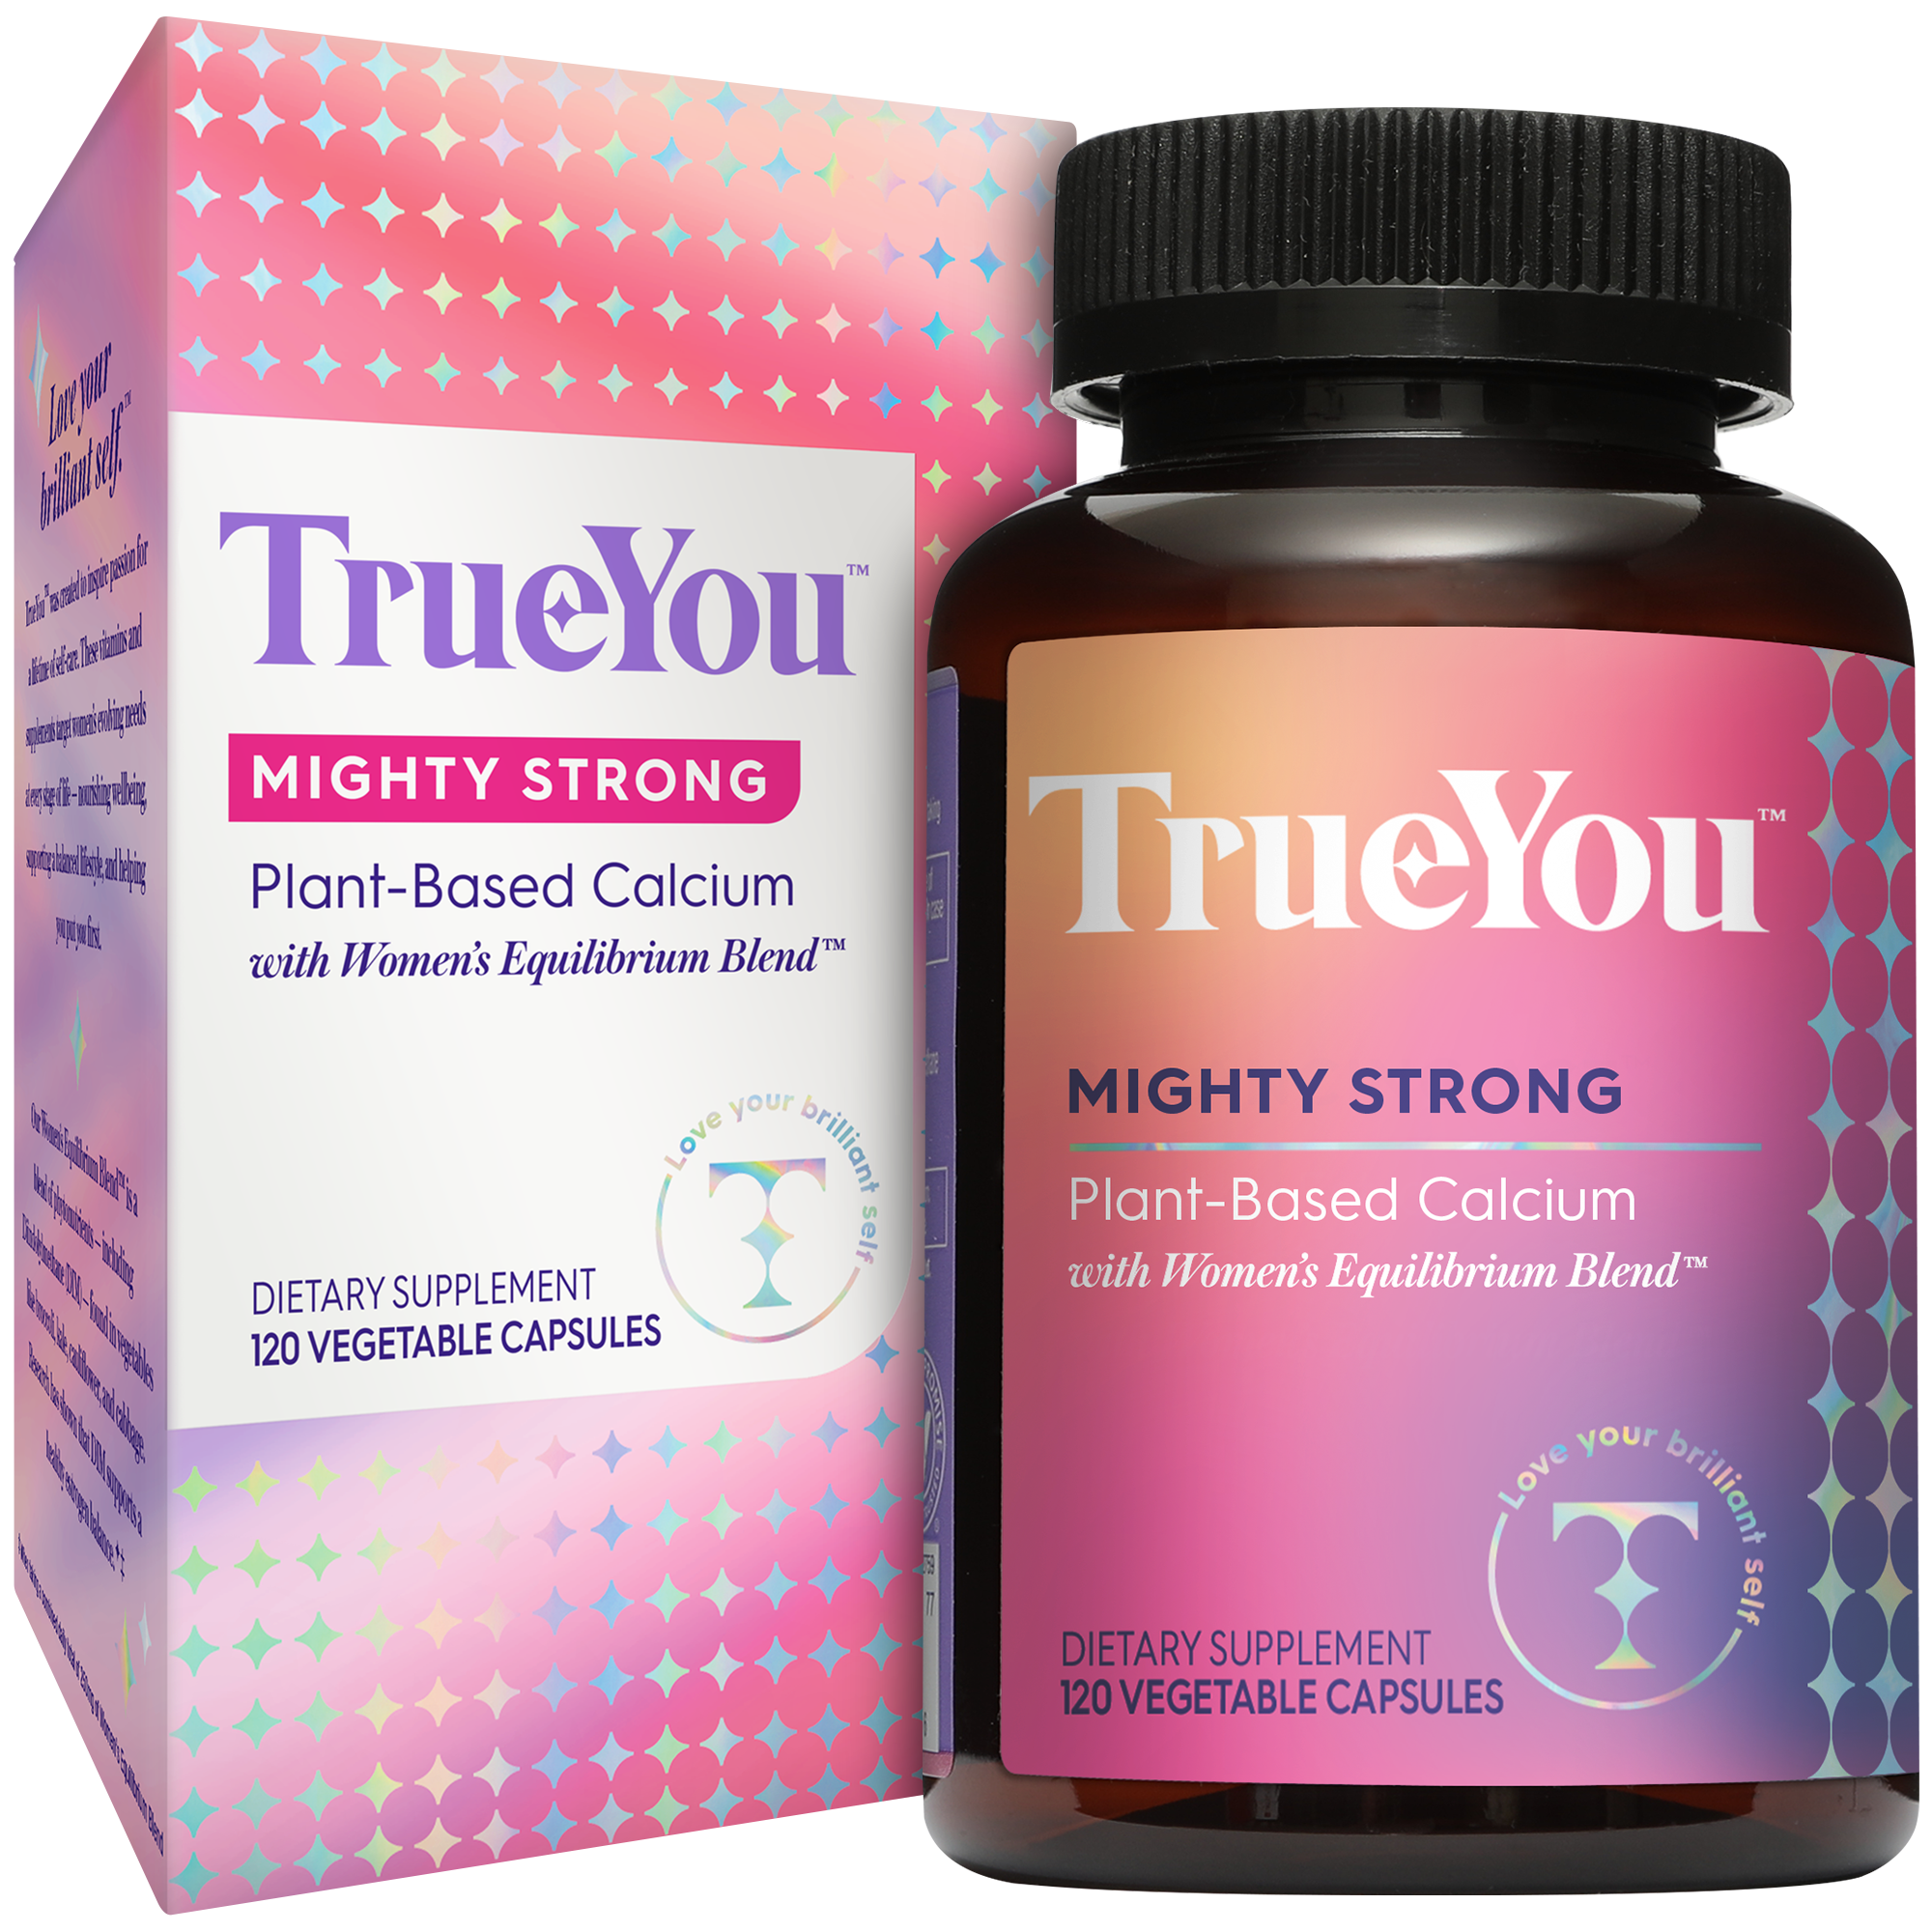 TrueYou Mighty Strong Plant-Based Calcium